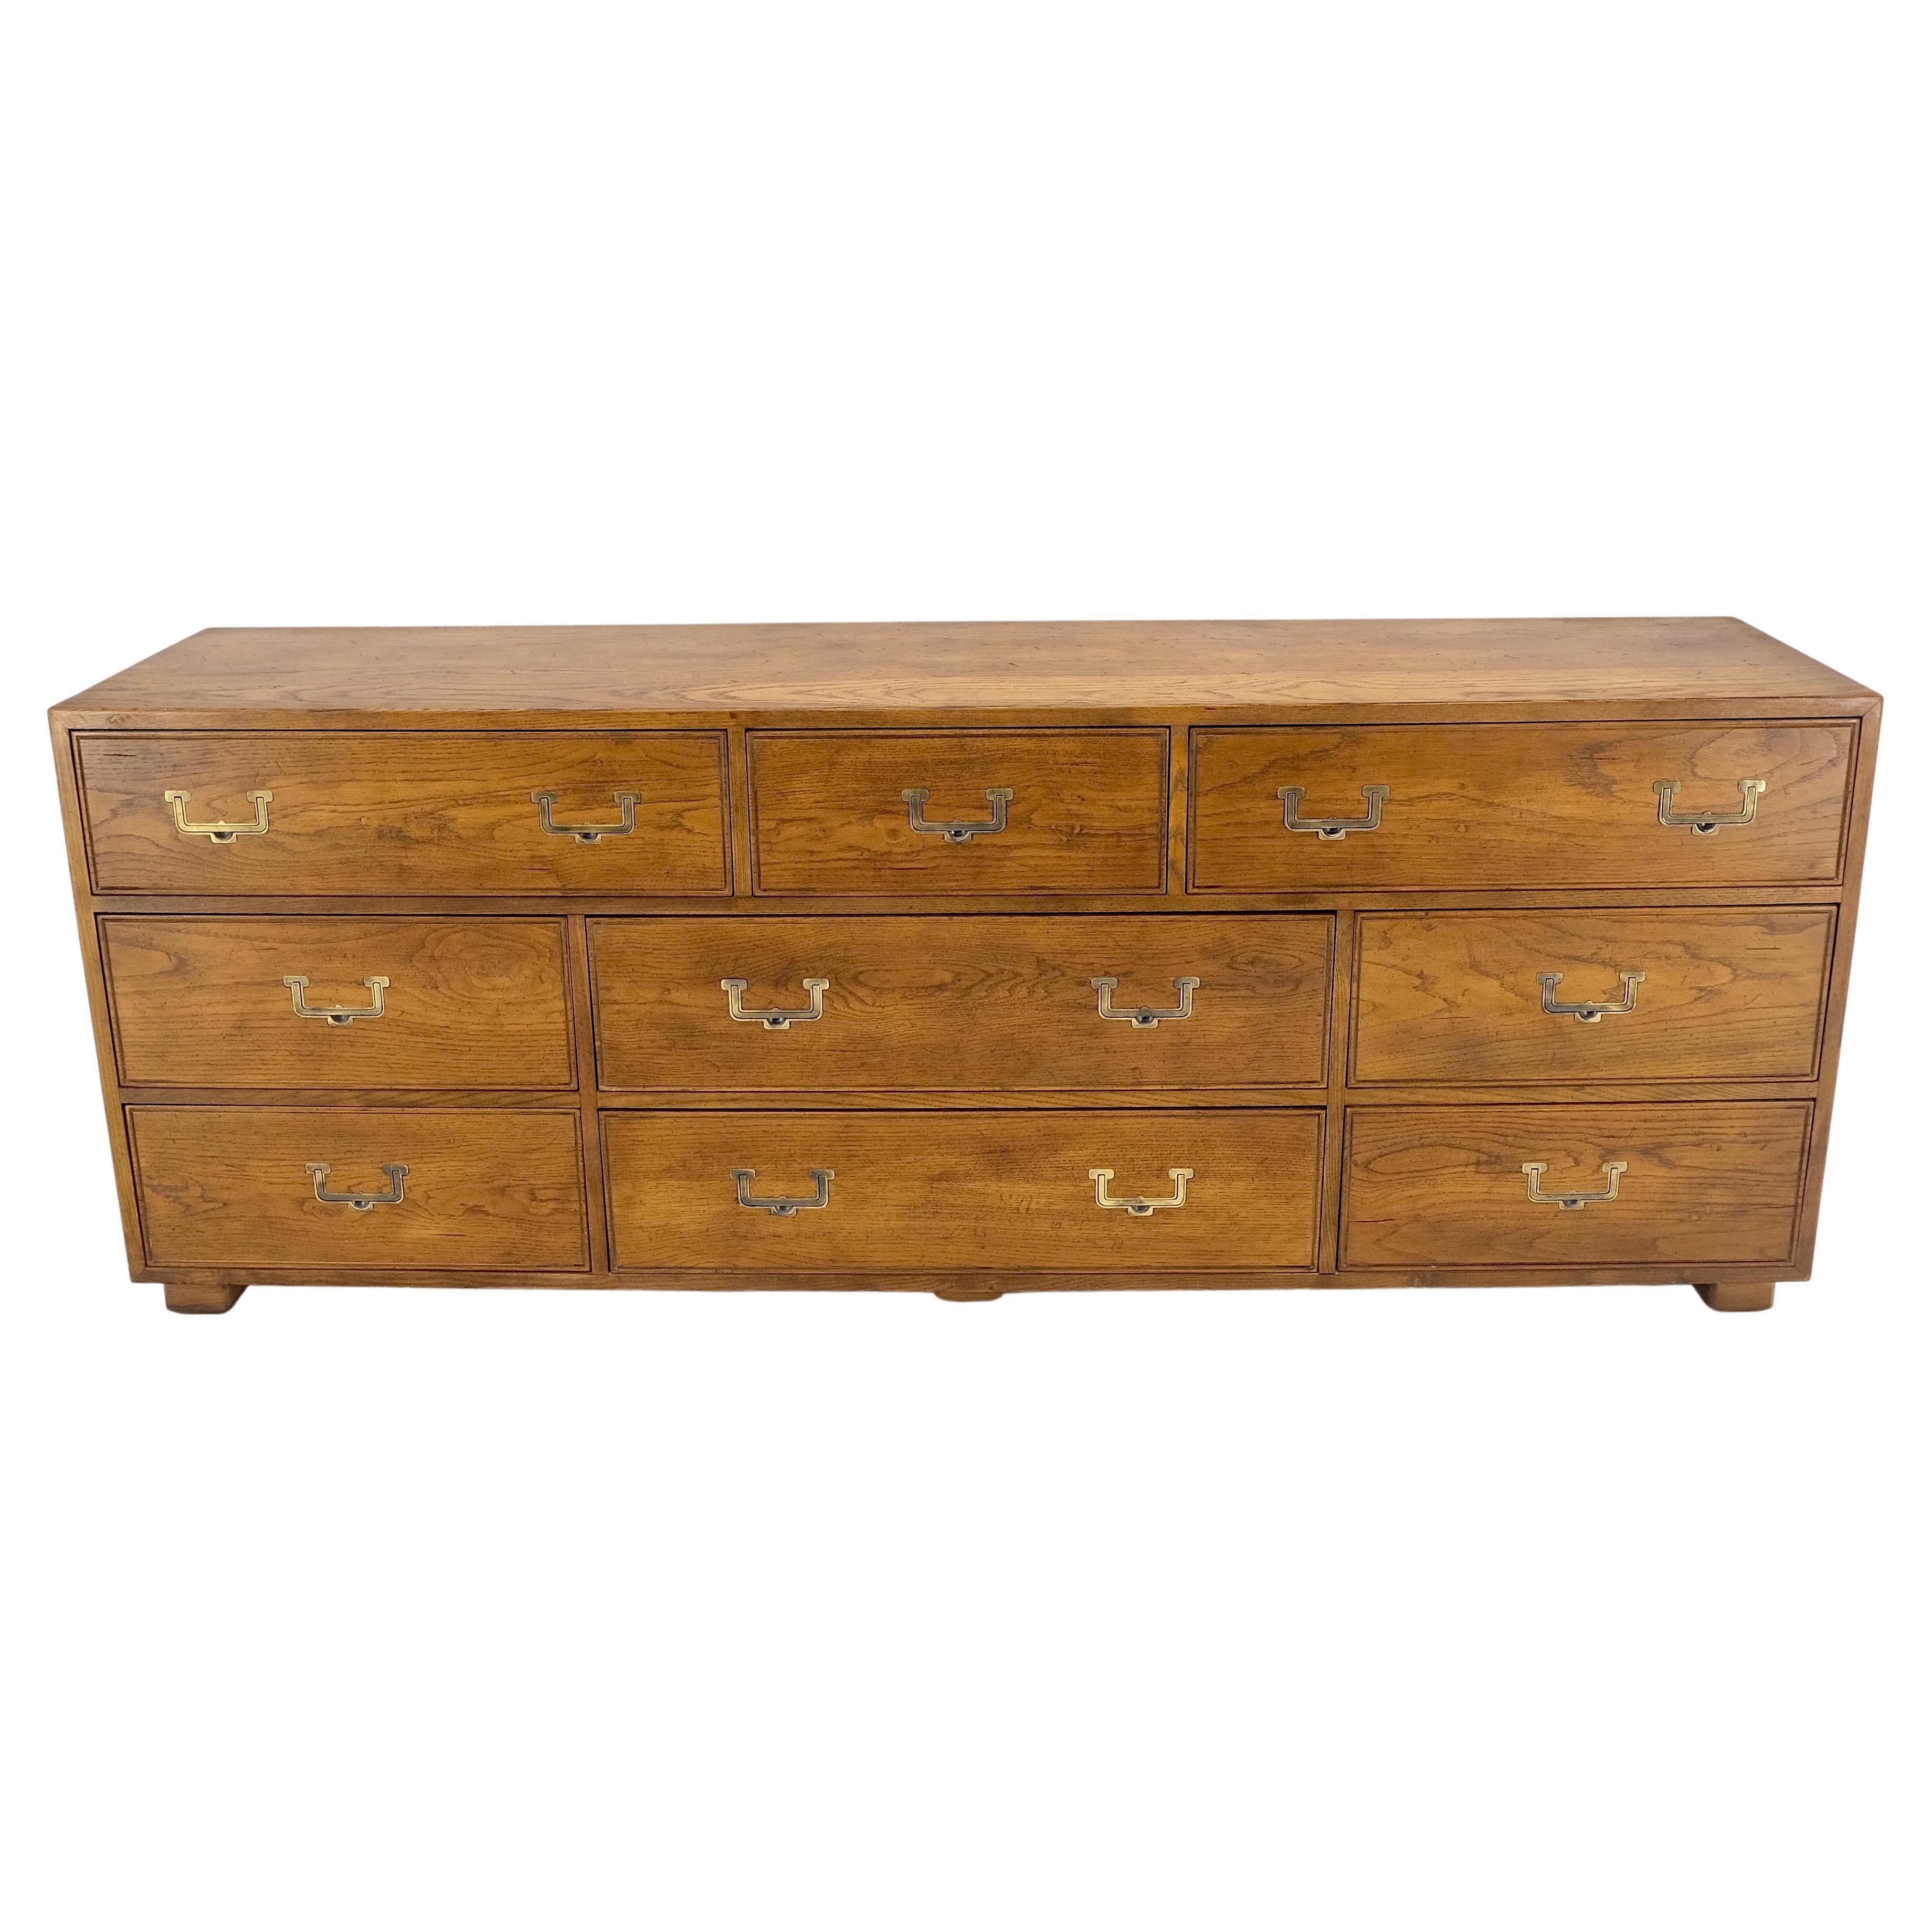 Henredon Campaign Style 9 Drawers Brass Drop Pulls Long Dresser Credenza Mint! For Sale